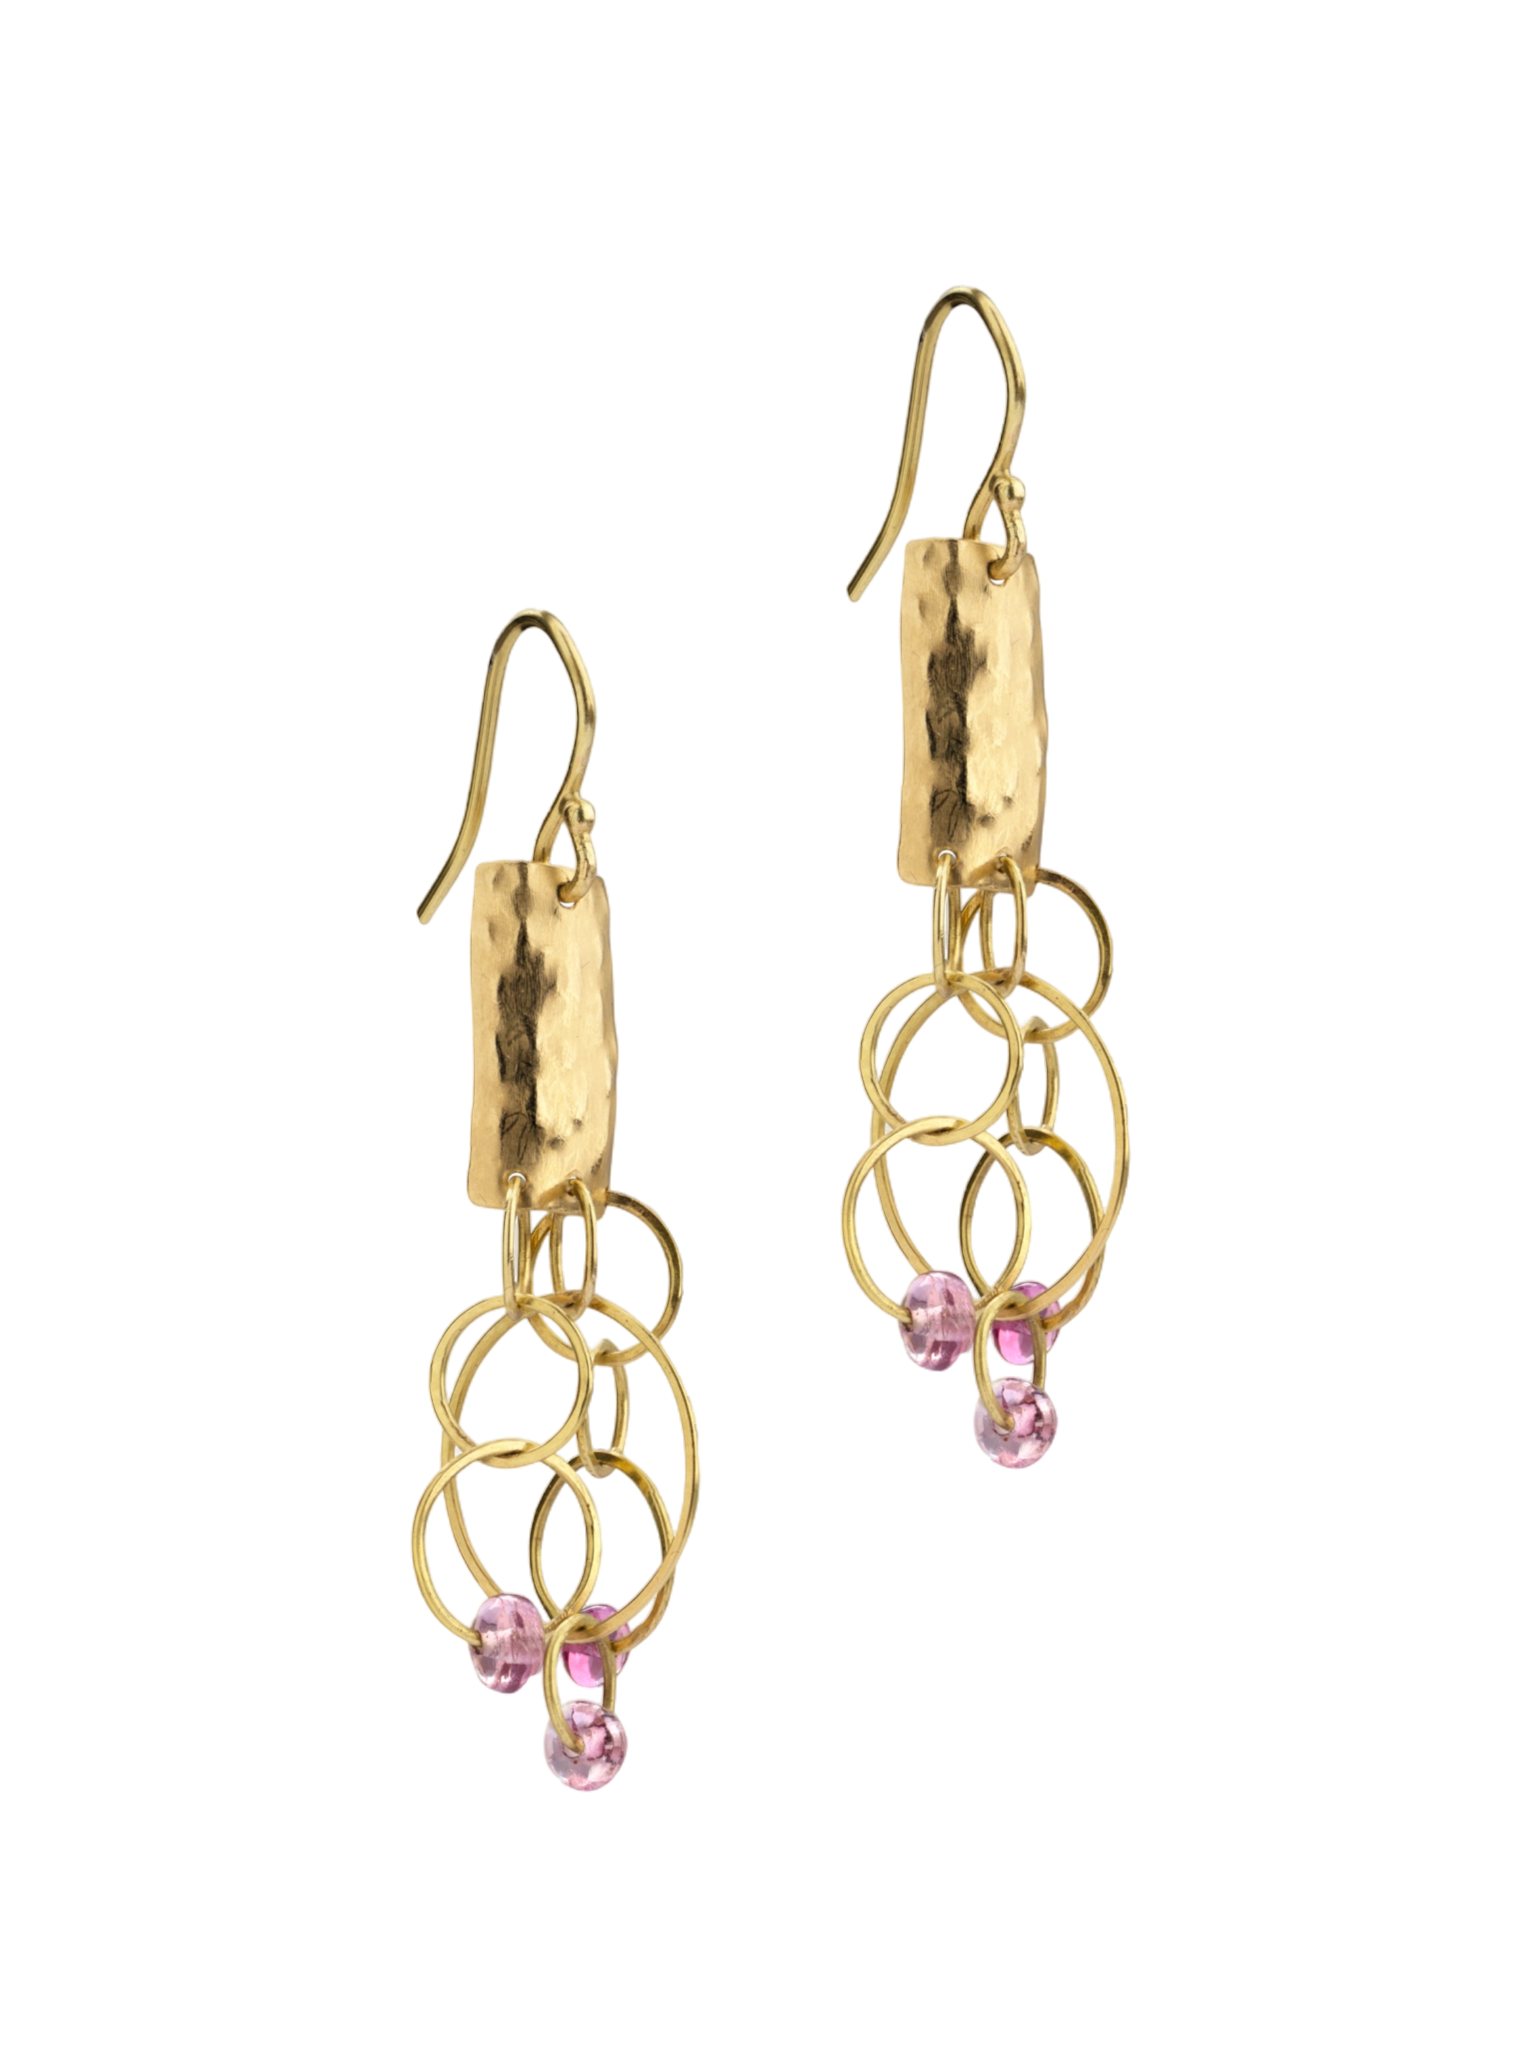 Tribal earrings with peach spinels